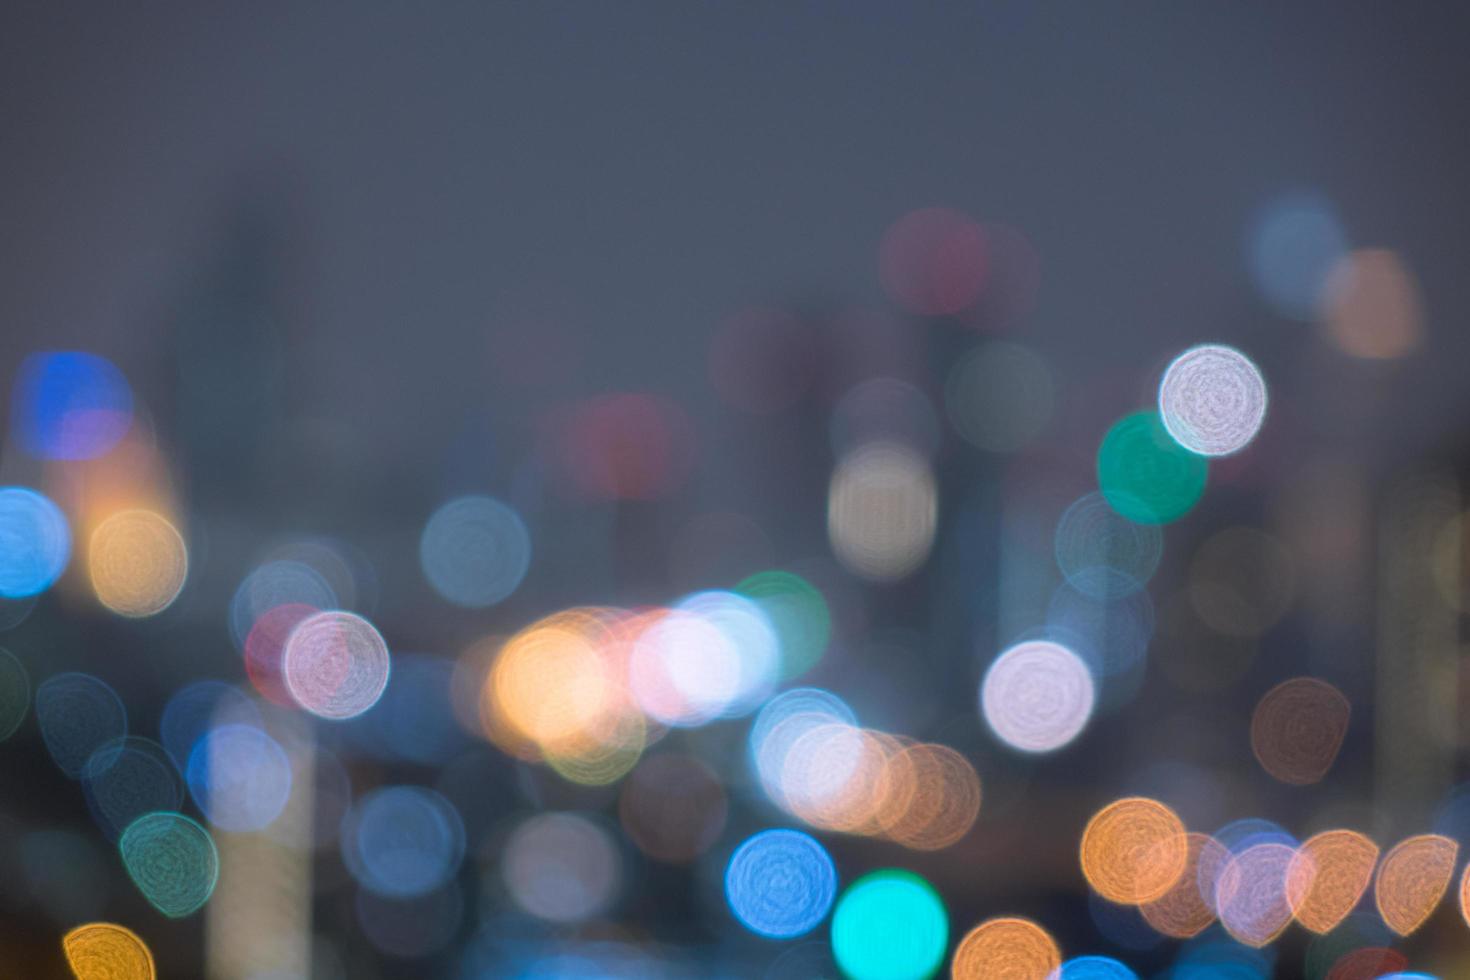 Abstract bokeh city light for background photo